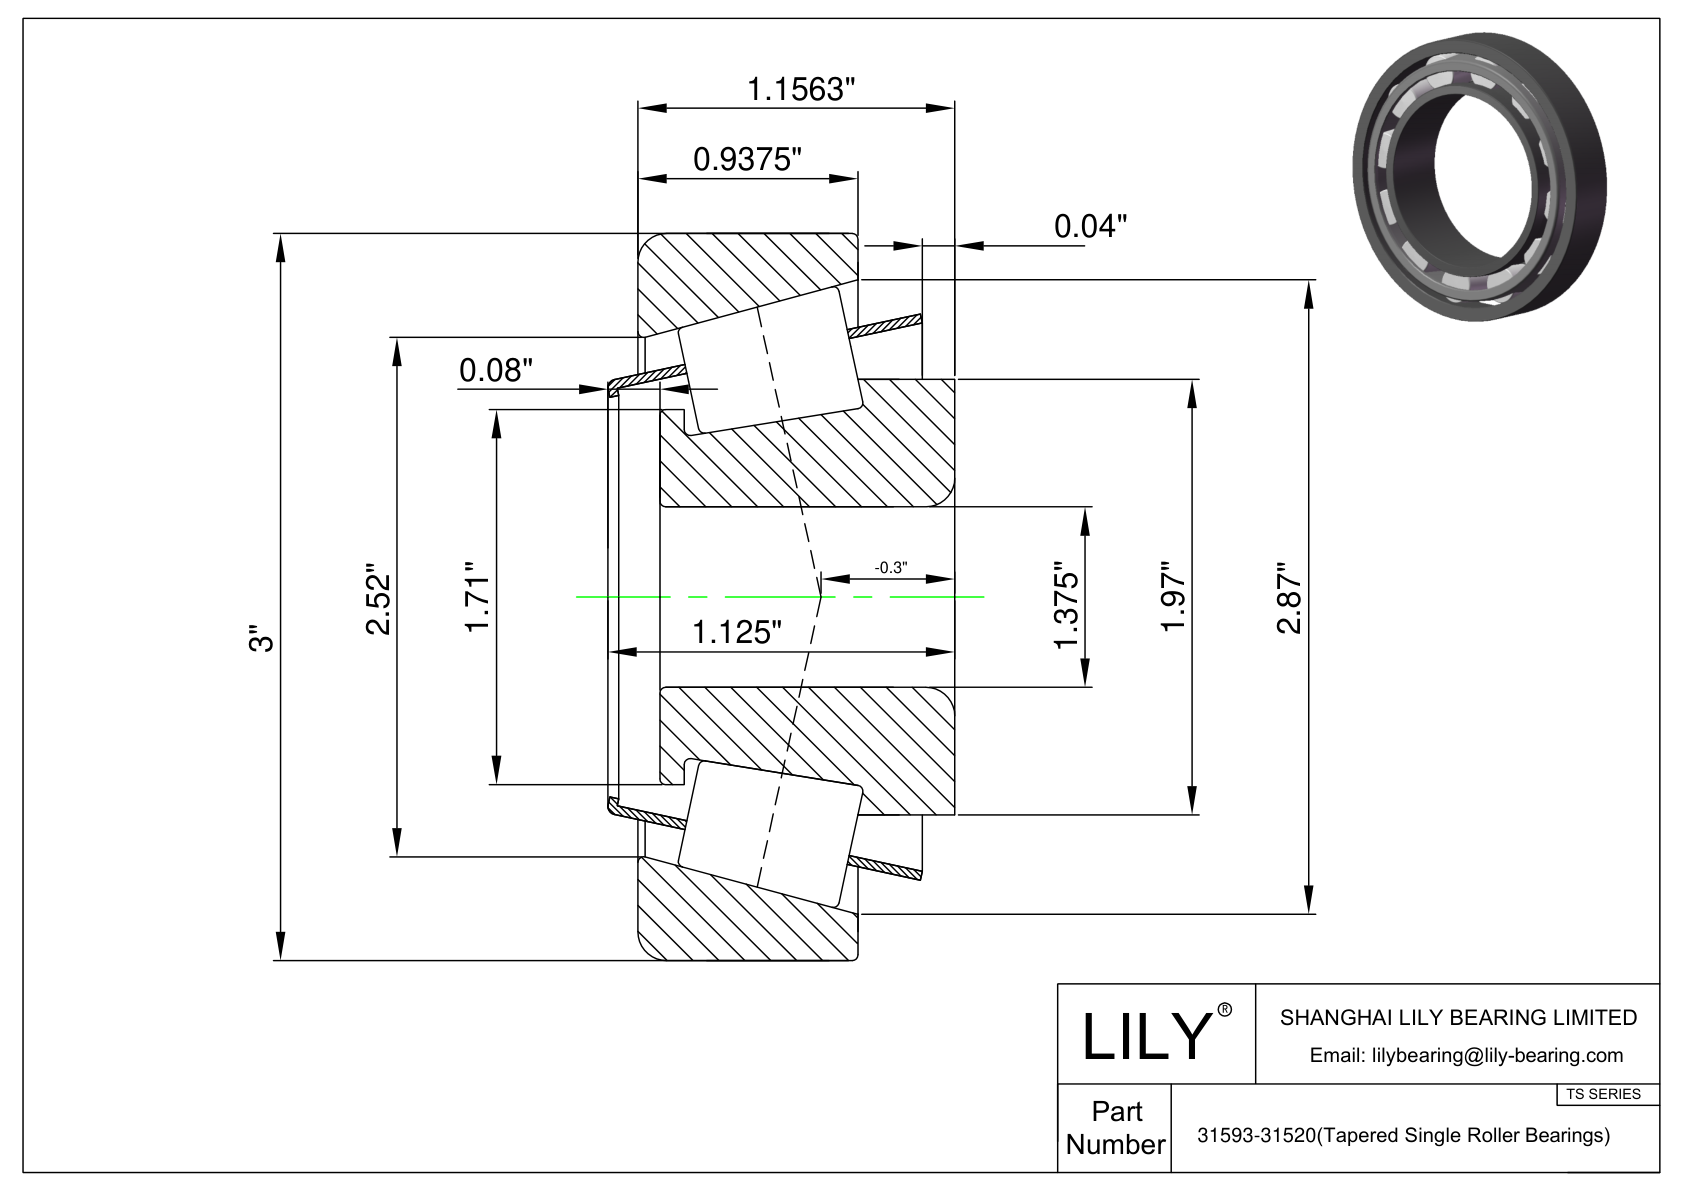 31593-31520 TS (Tapered Single Roller Bearings) (Imperial) cad drawing